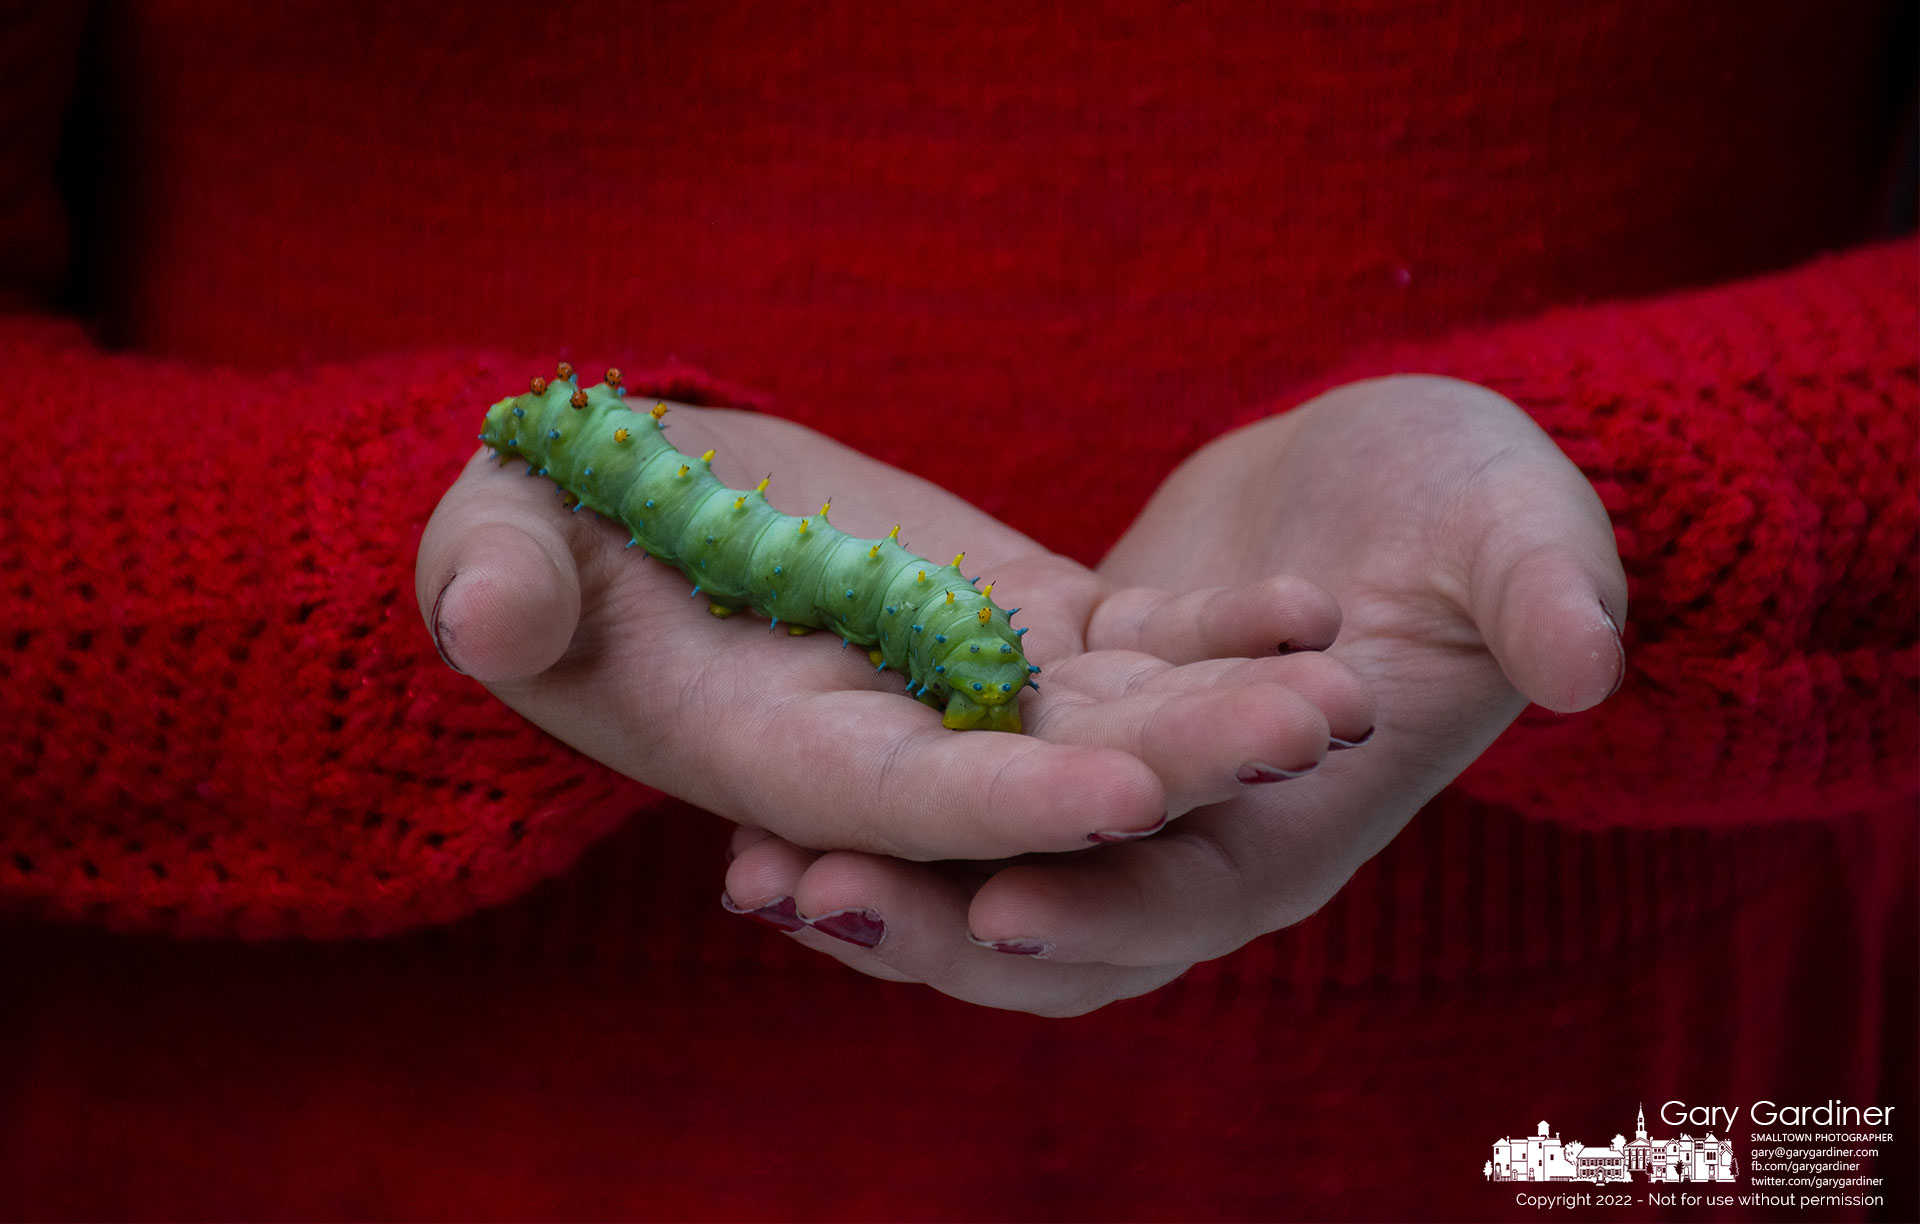 A young girl holds a Cecropia moth caterpillar during Autumn Arborfest at Alum Creek Park North. My Final Photo for September 24, 2022.